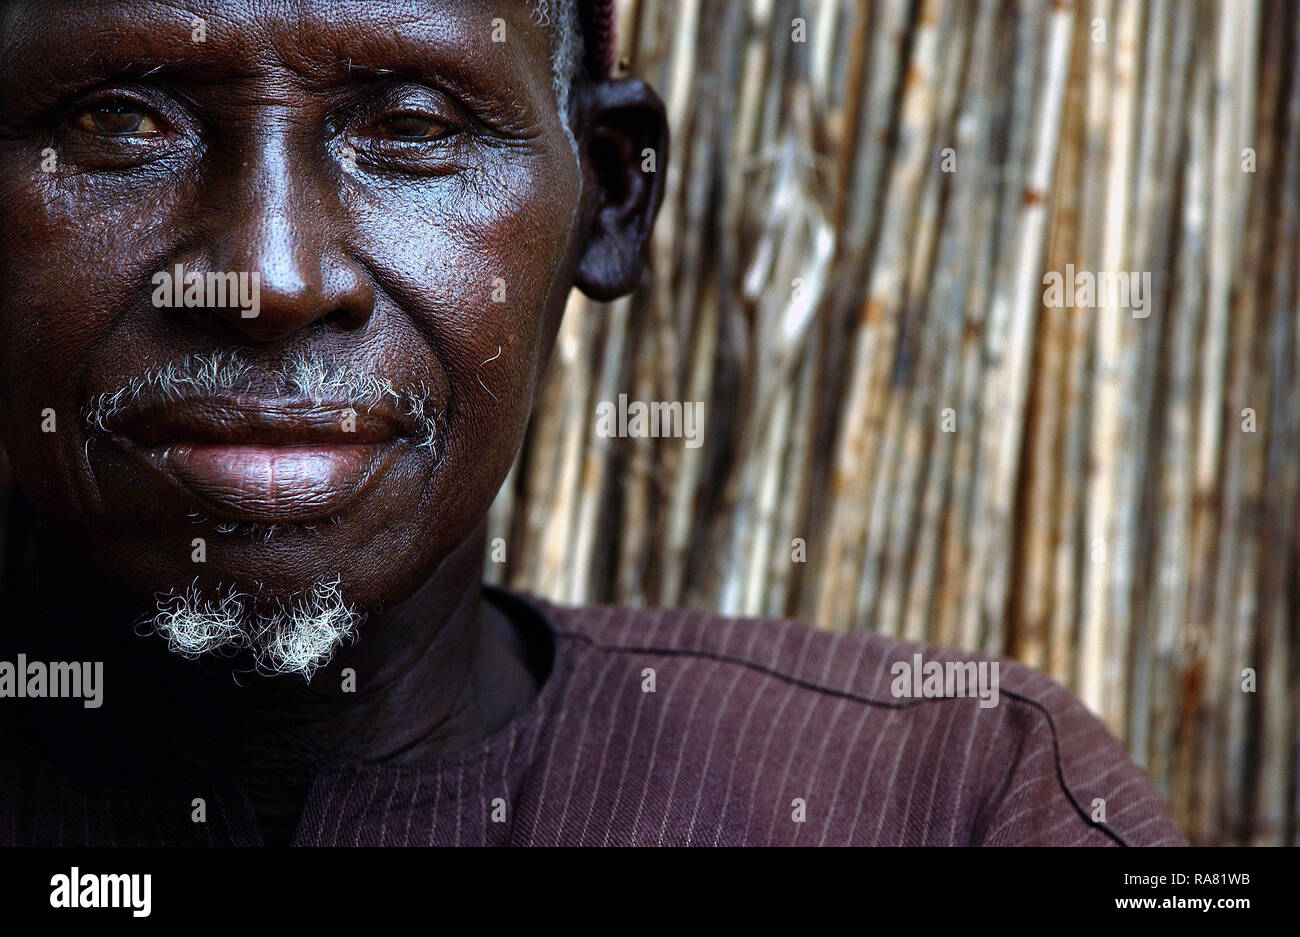 2003 - A local man from a small village located on the outskirts of Dakar, Senegal. Photograph taken in support of Joint Task Force Liberia Stock Photo